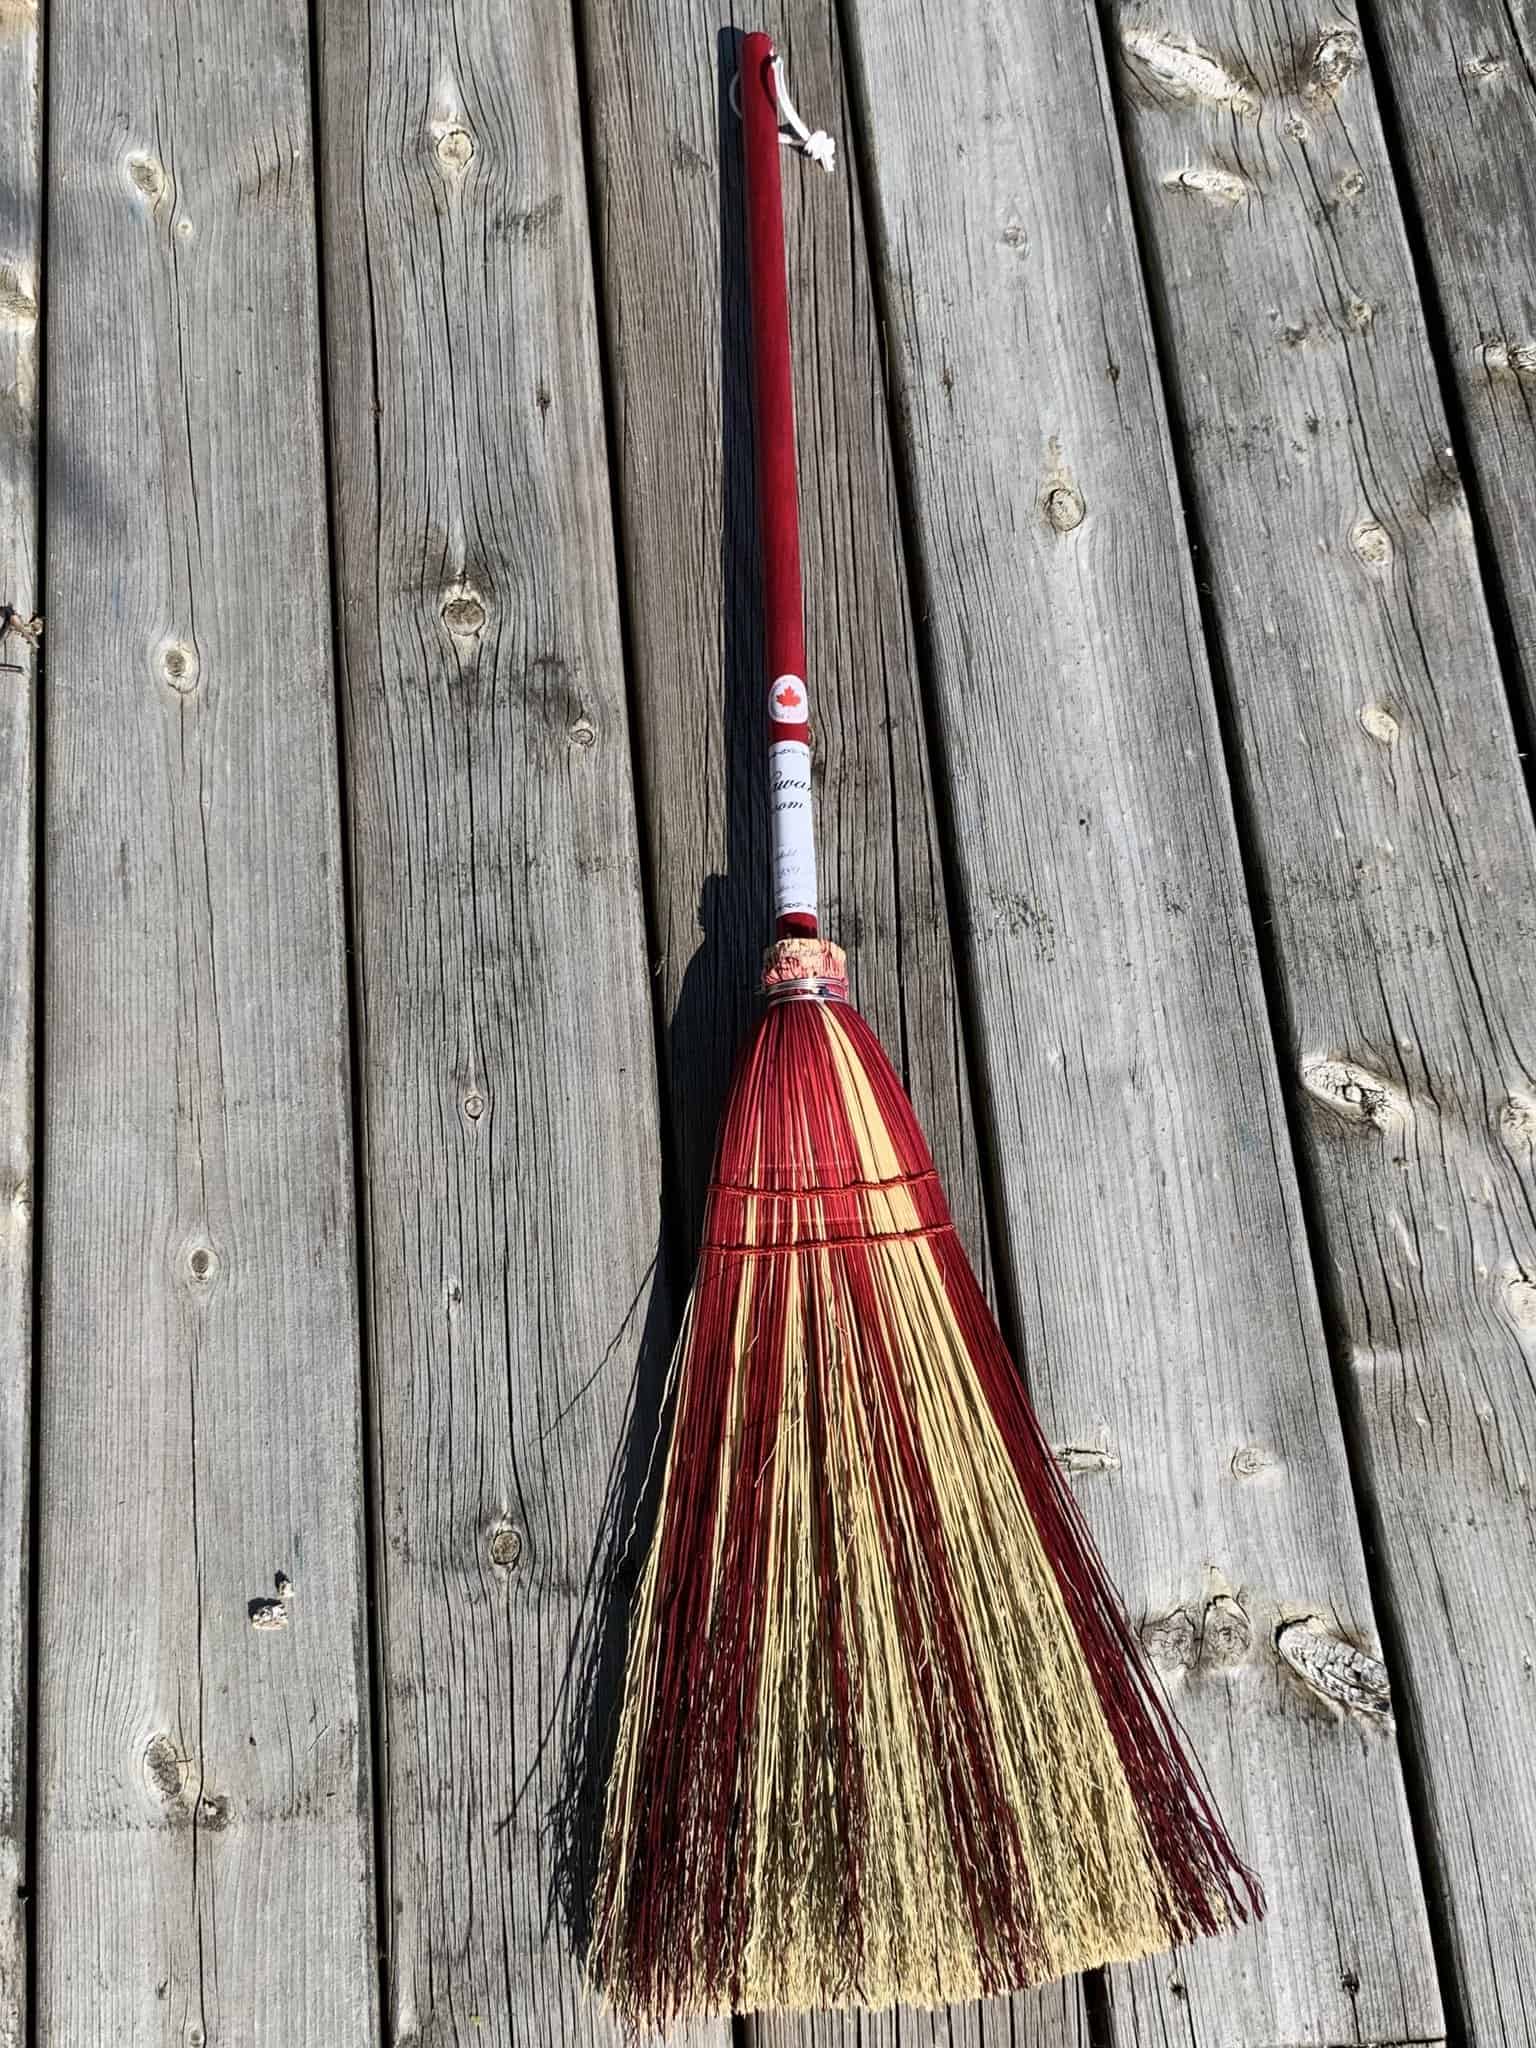 Fireplace broom with a splash of red